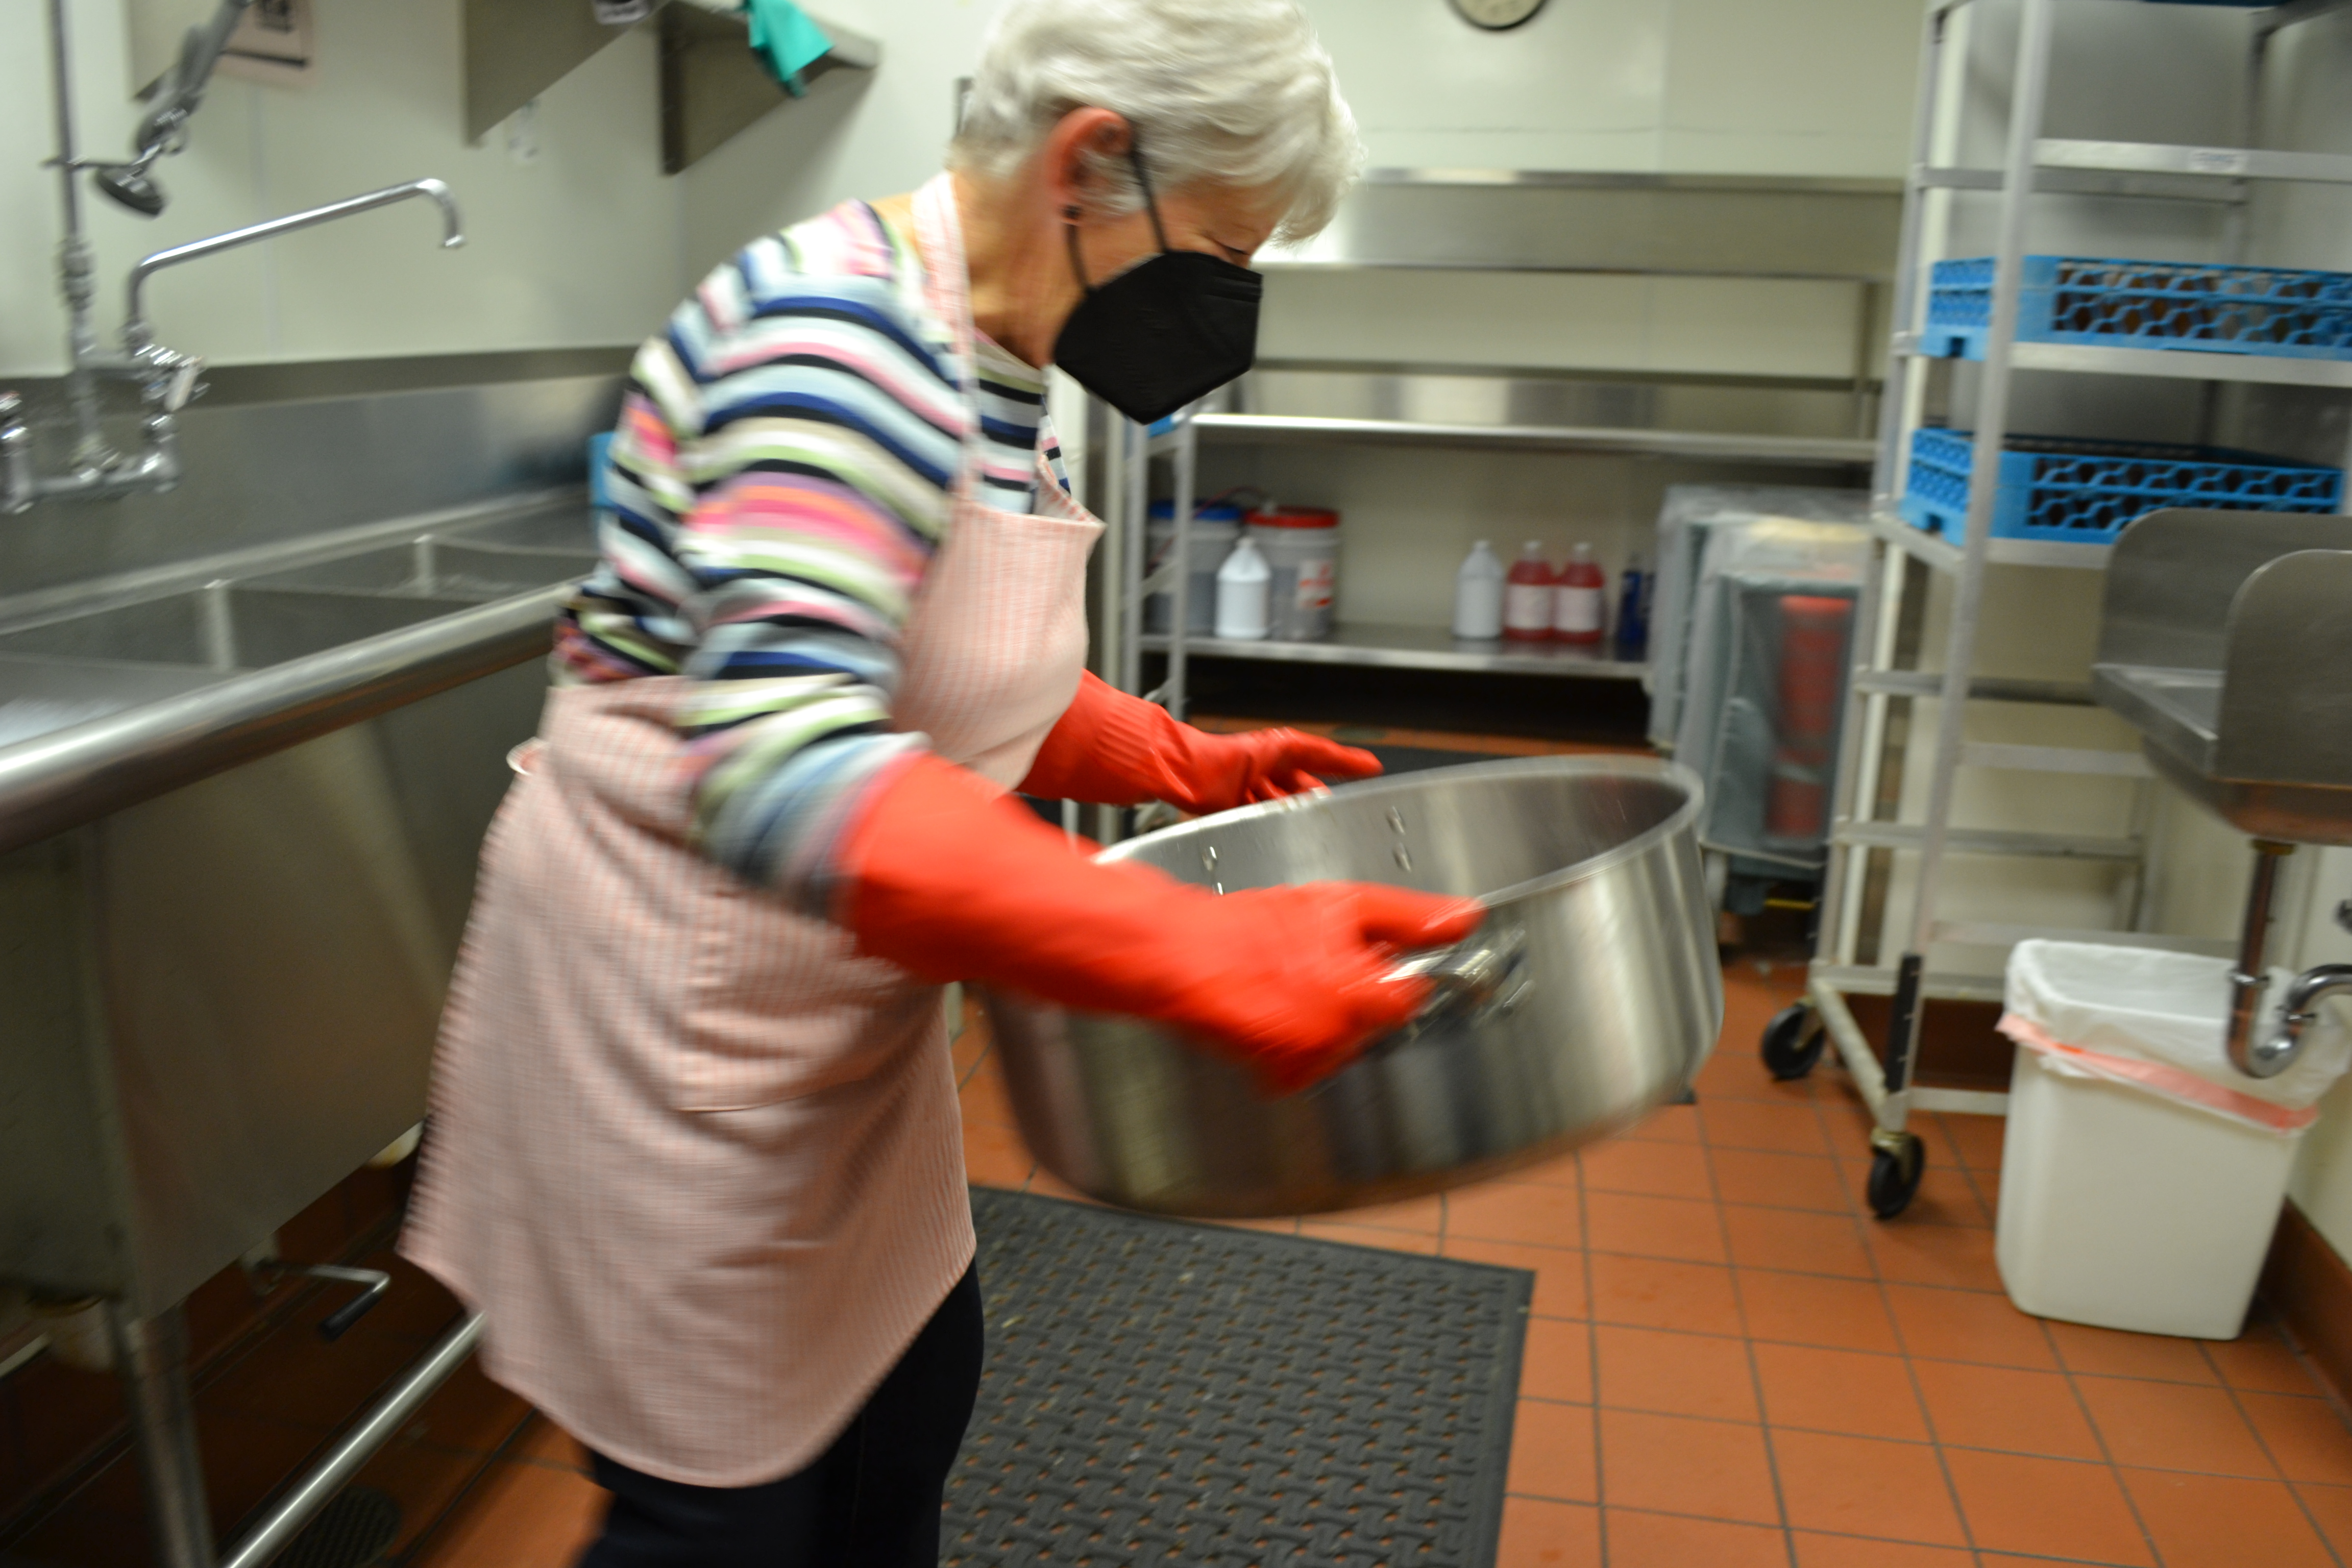 A gray-haired, masked volunteer carries a heavy pot in the dishwashing room. Photo by Alyssa Buckley.